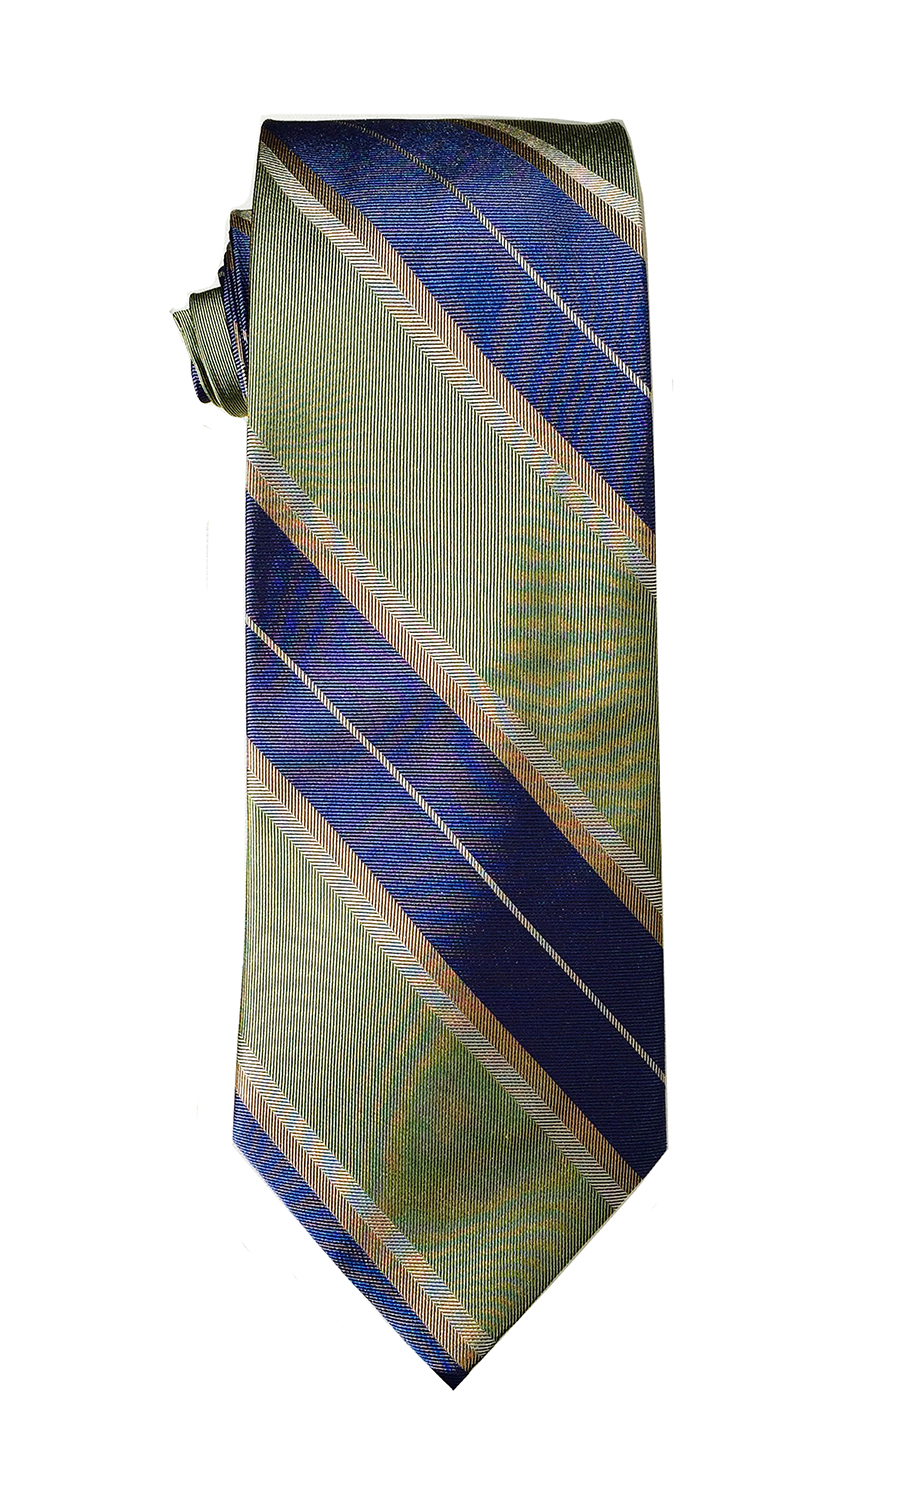 Oscar Lima tie in nautical blue and willow green